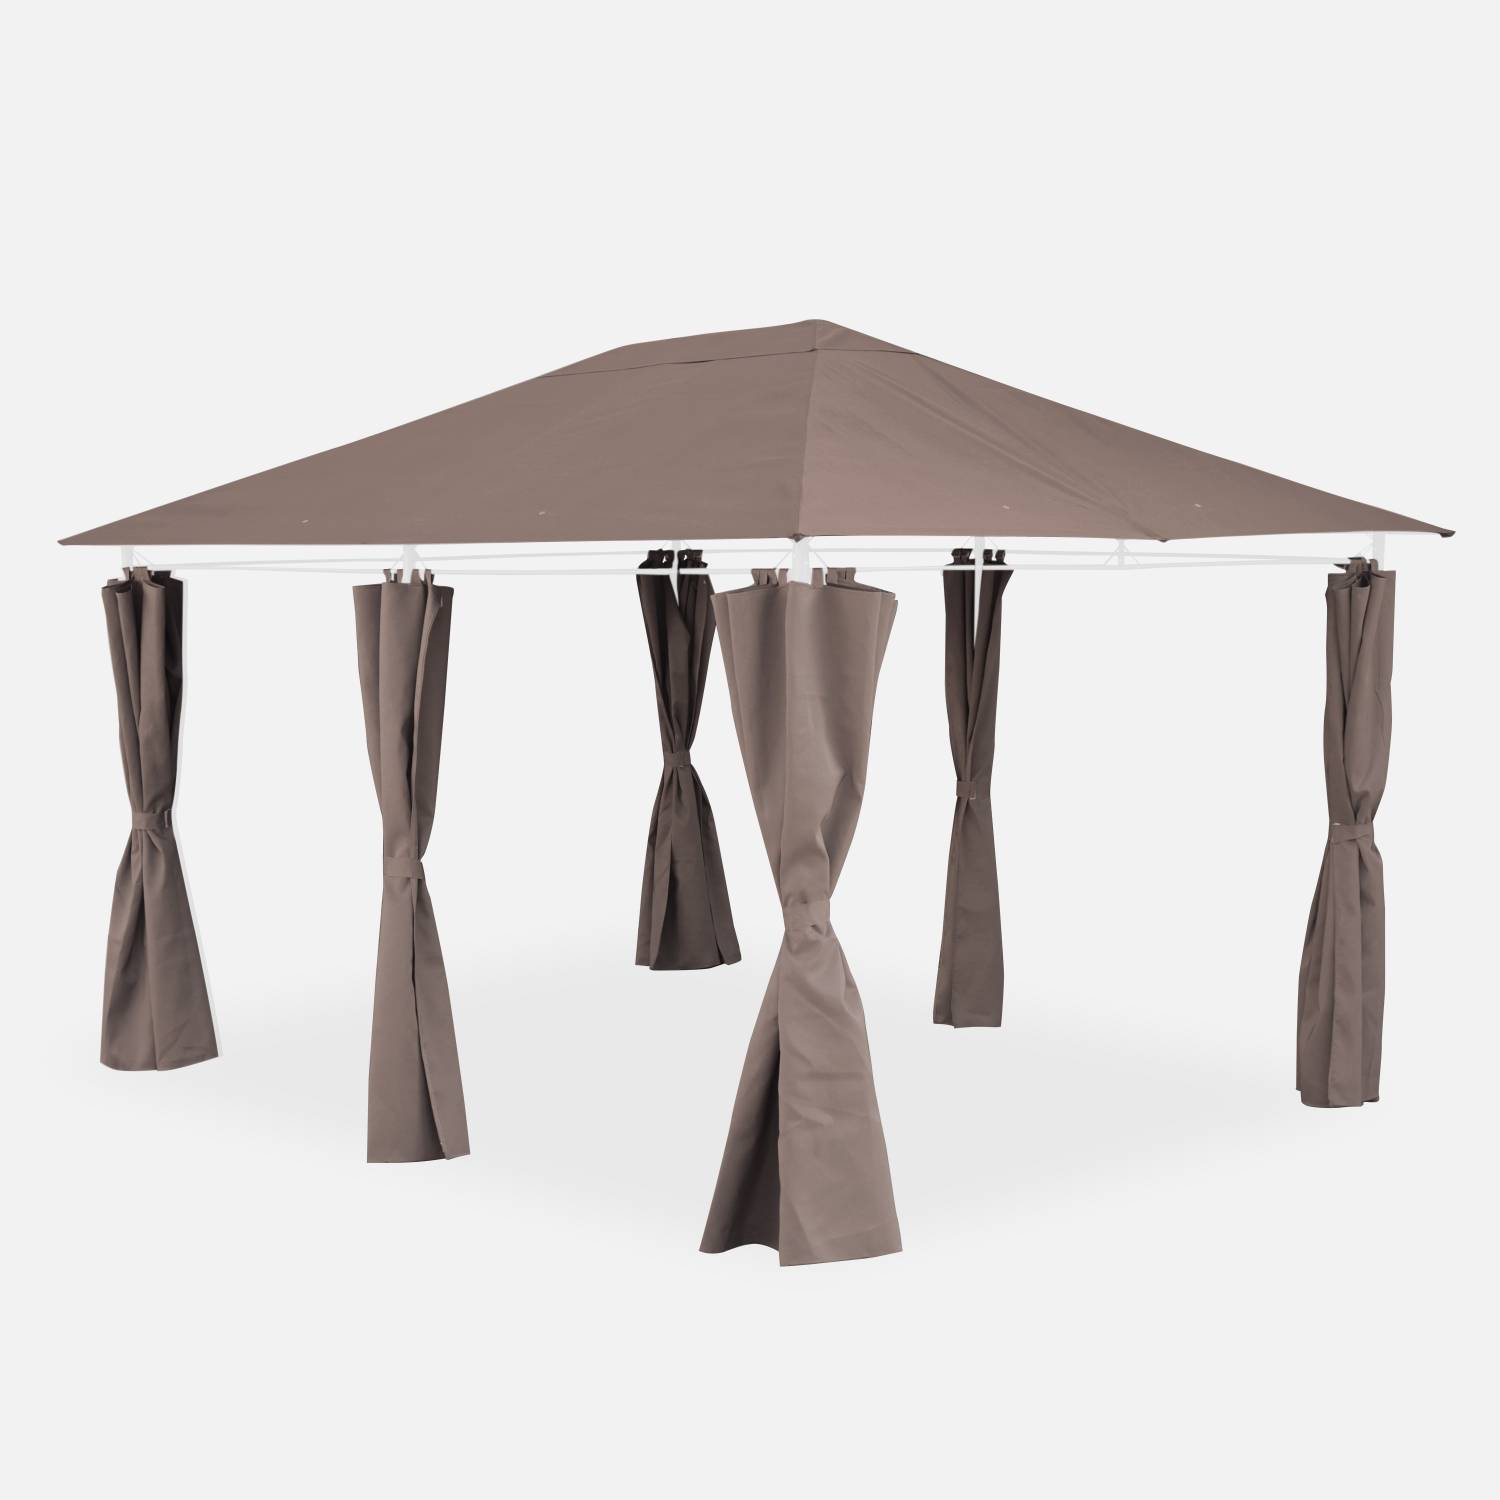 Replacement canopy and side curtain kit for gazebo, Beige-brown | sweeek